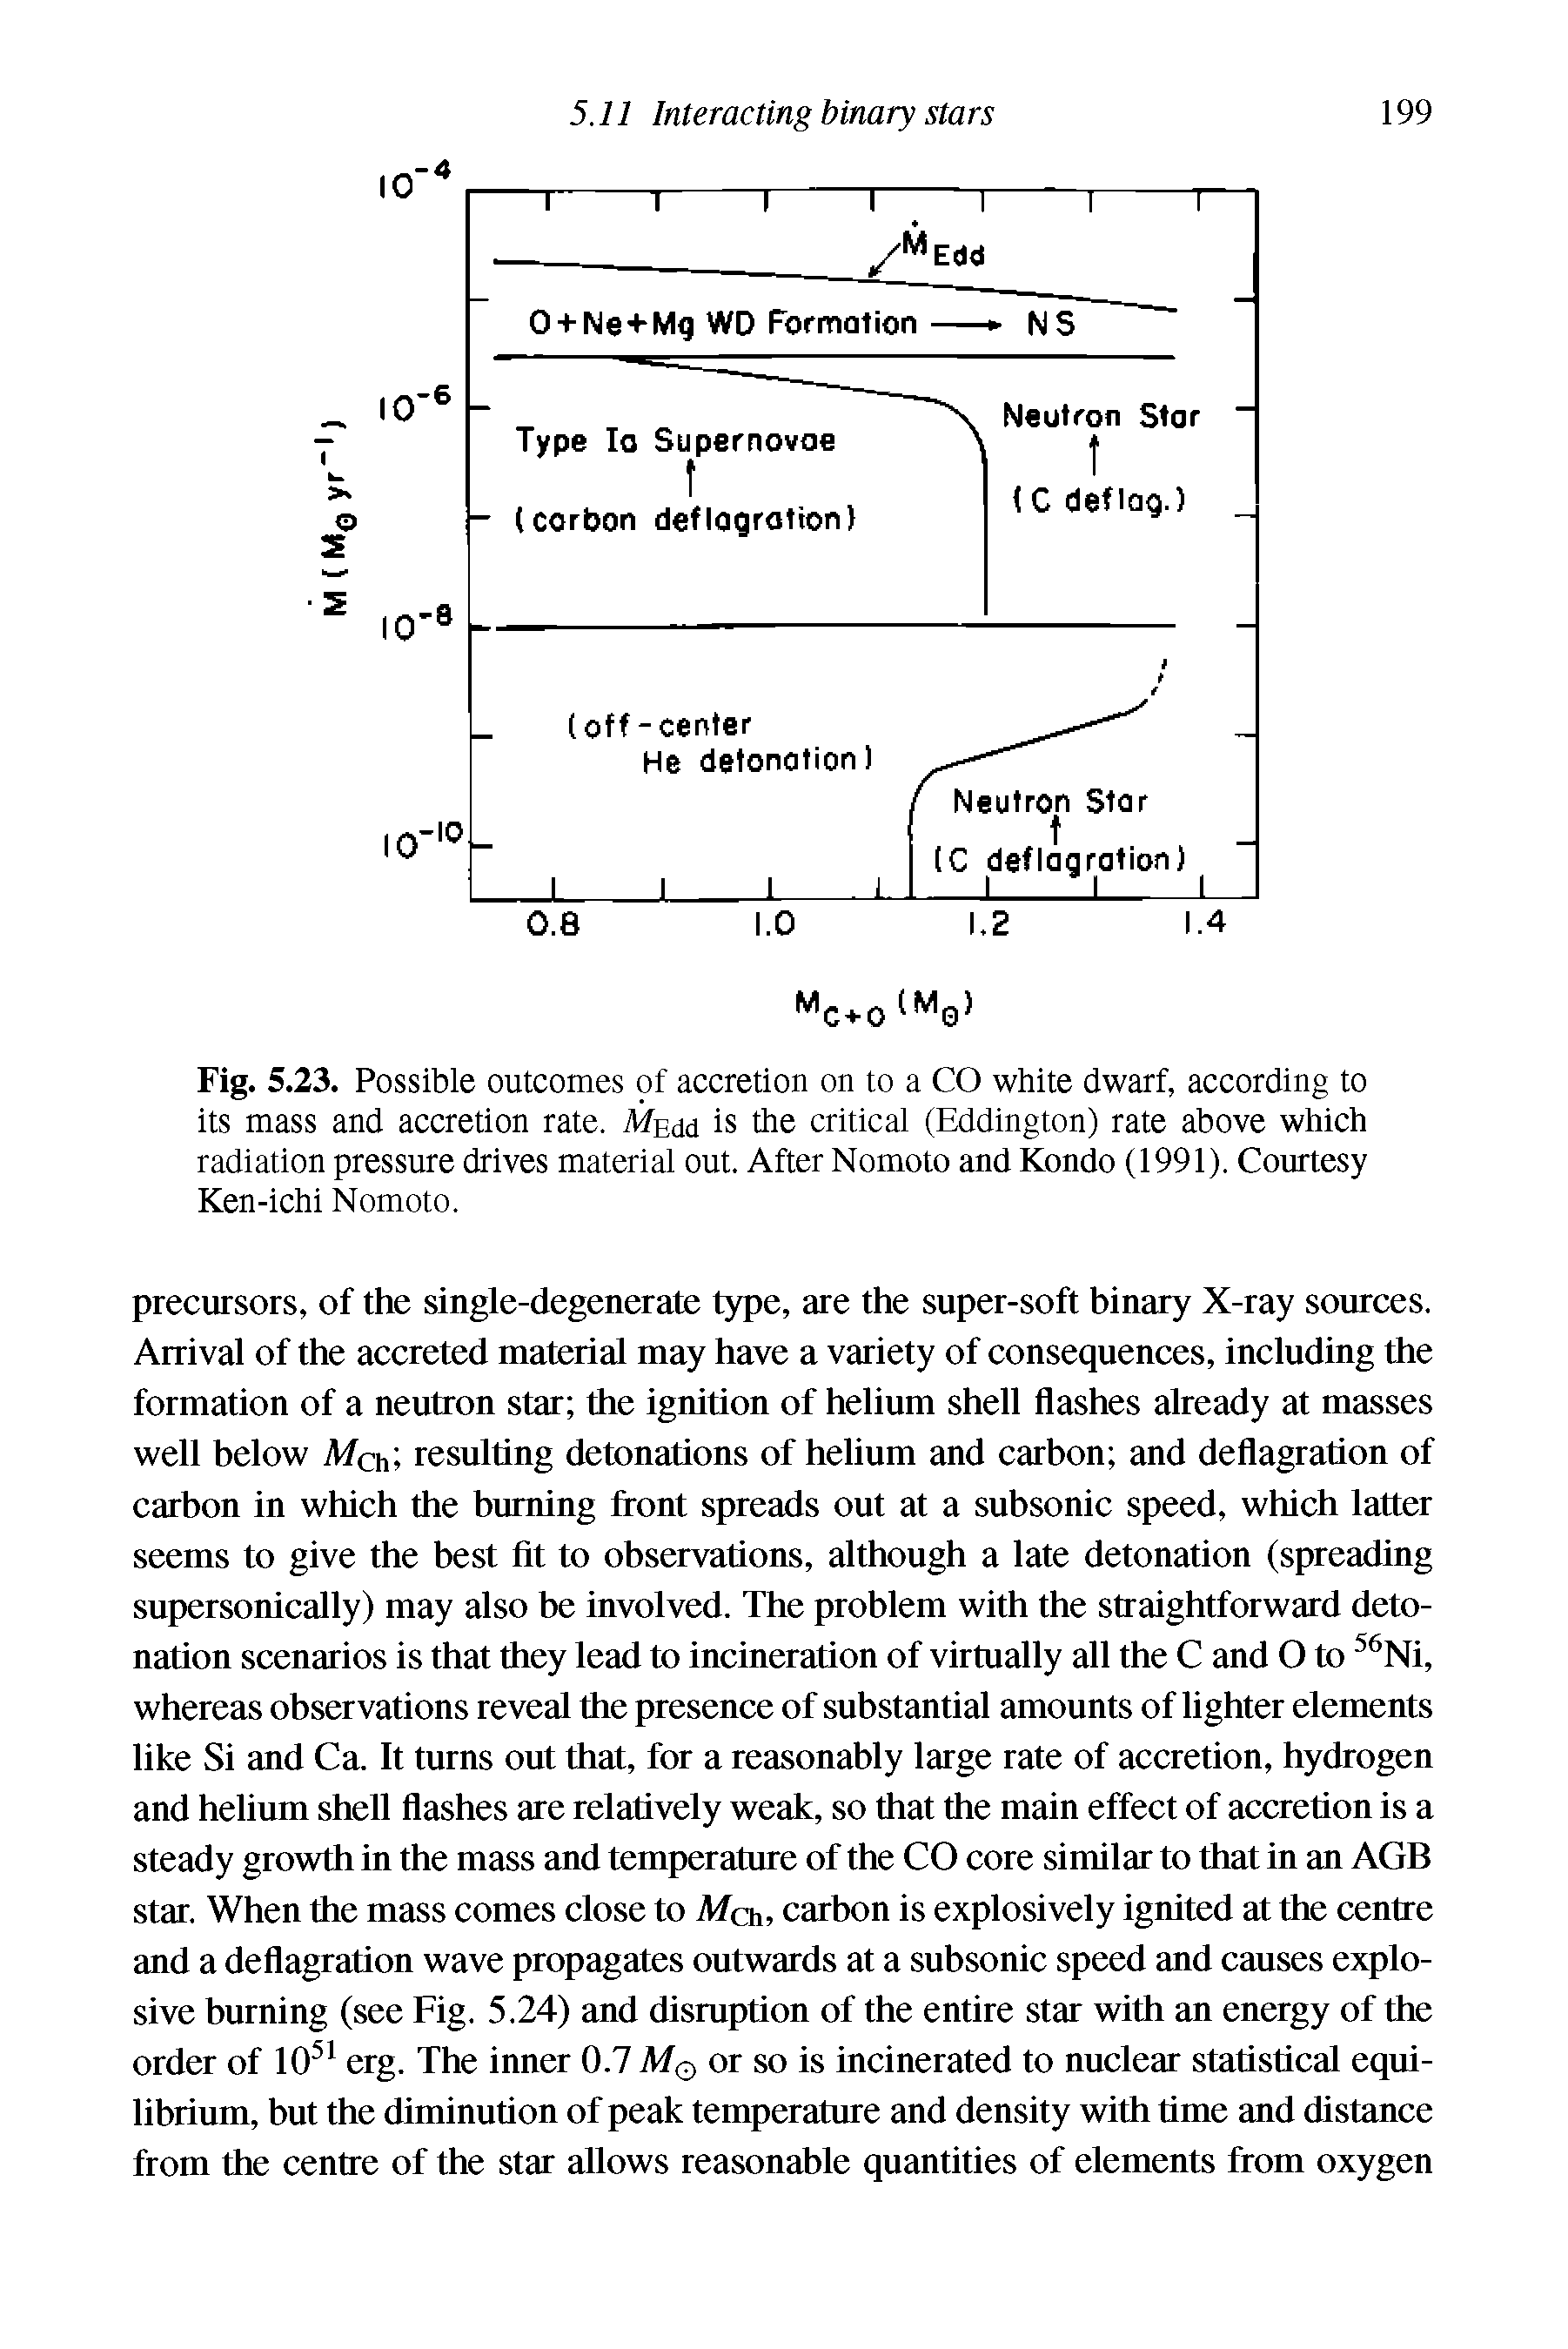 Fig. 5.23. Possible outcomes of accretion on to a CO white dwarf, according to its mass and accretion rate. Medd is the critical (Eddington) rate above which radiation pressure drives material out. After Nomoto and Kondo (1991). Courtesy Ken-ichi Nomoto.